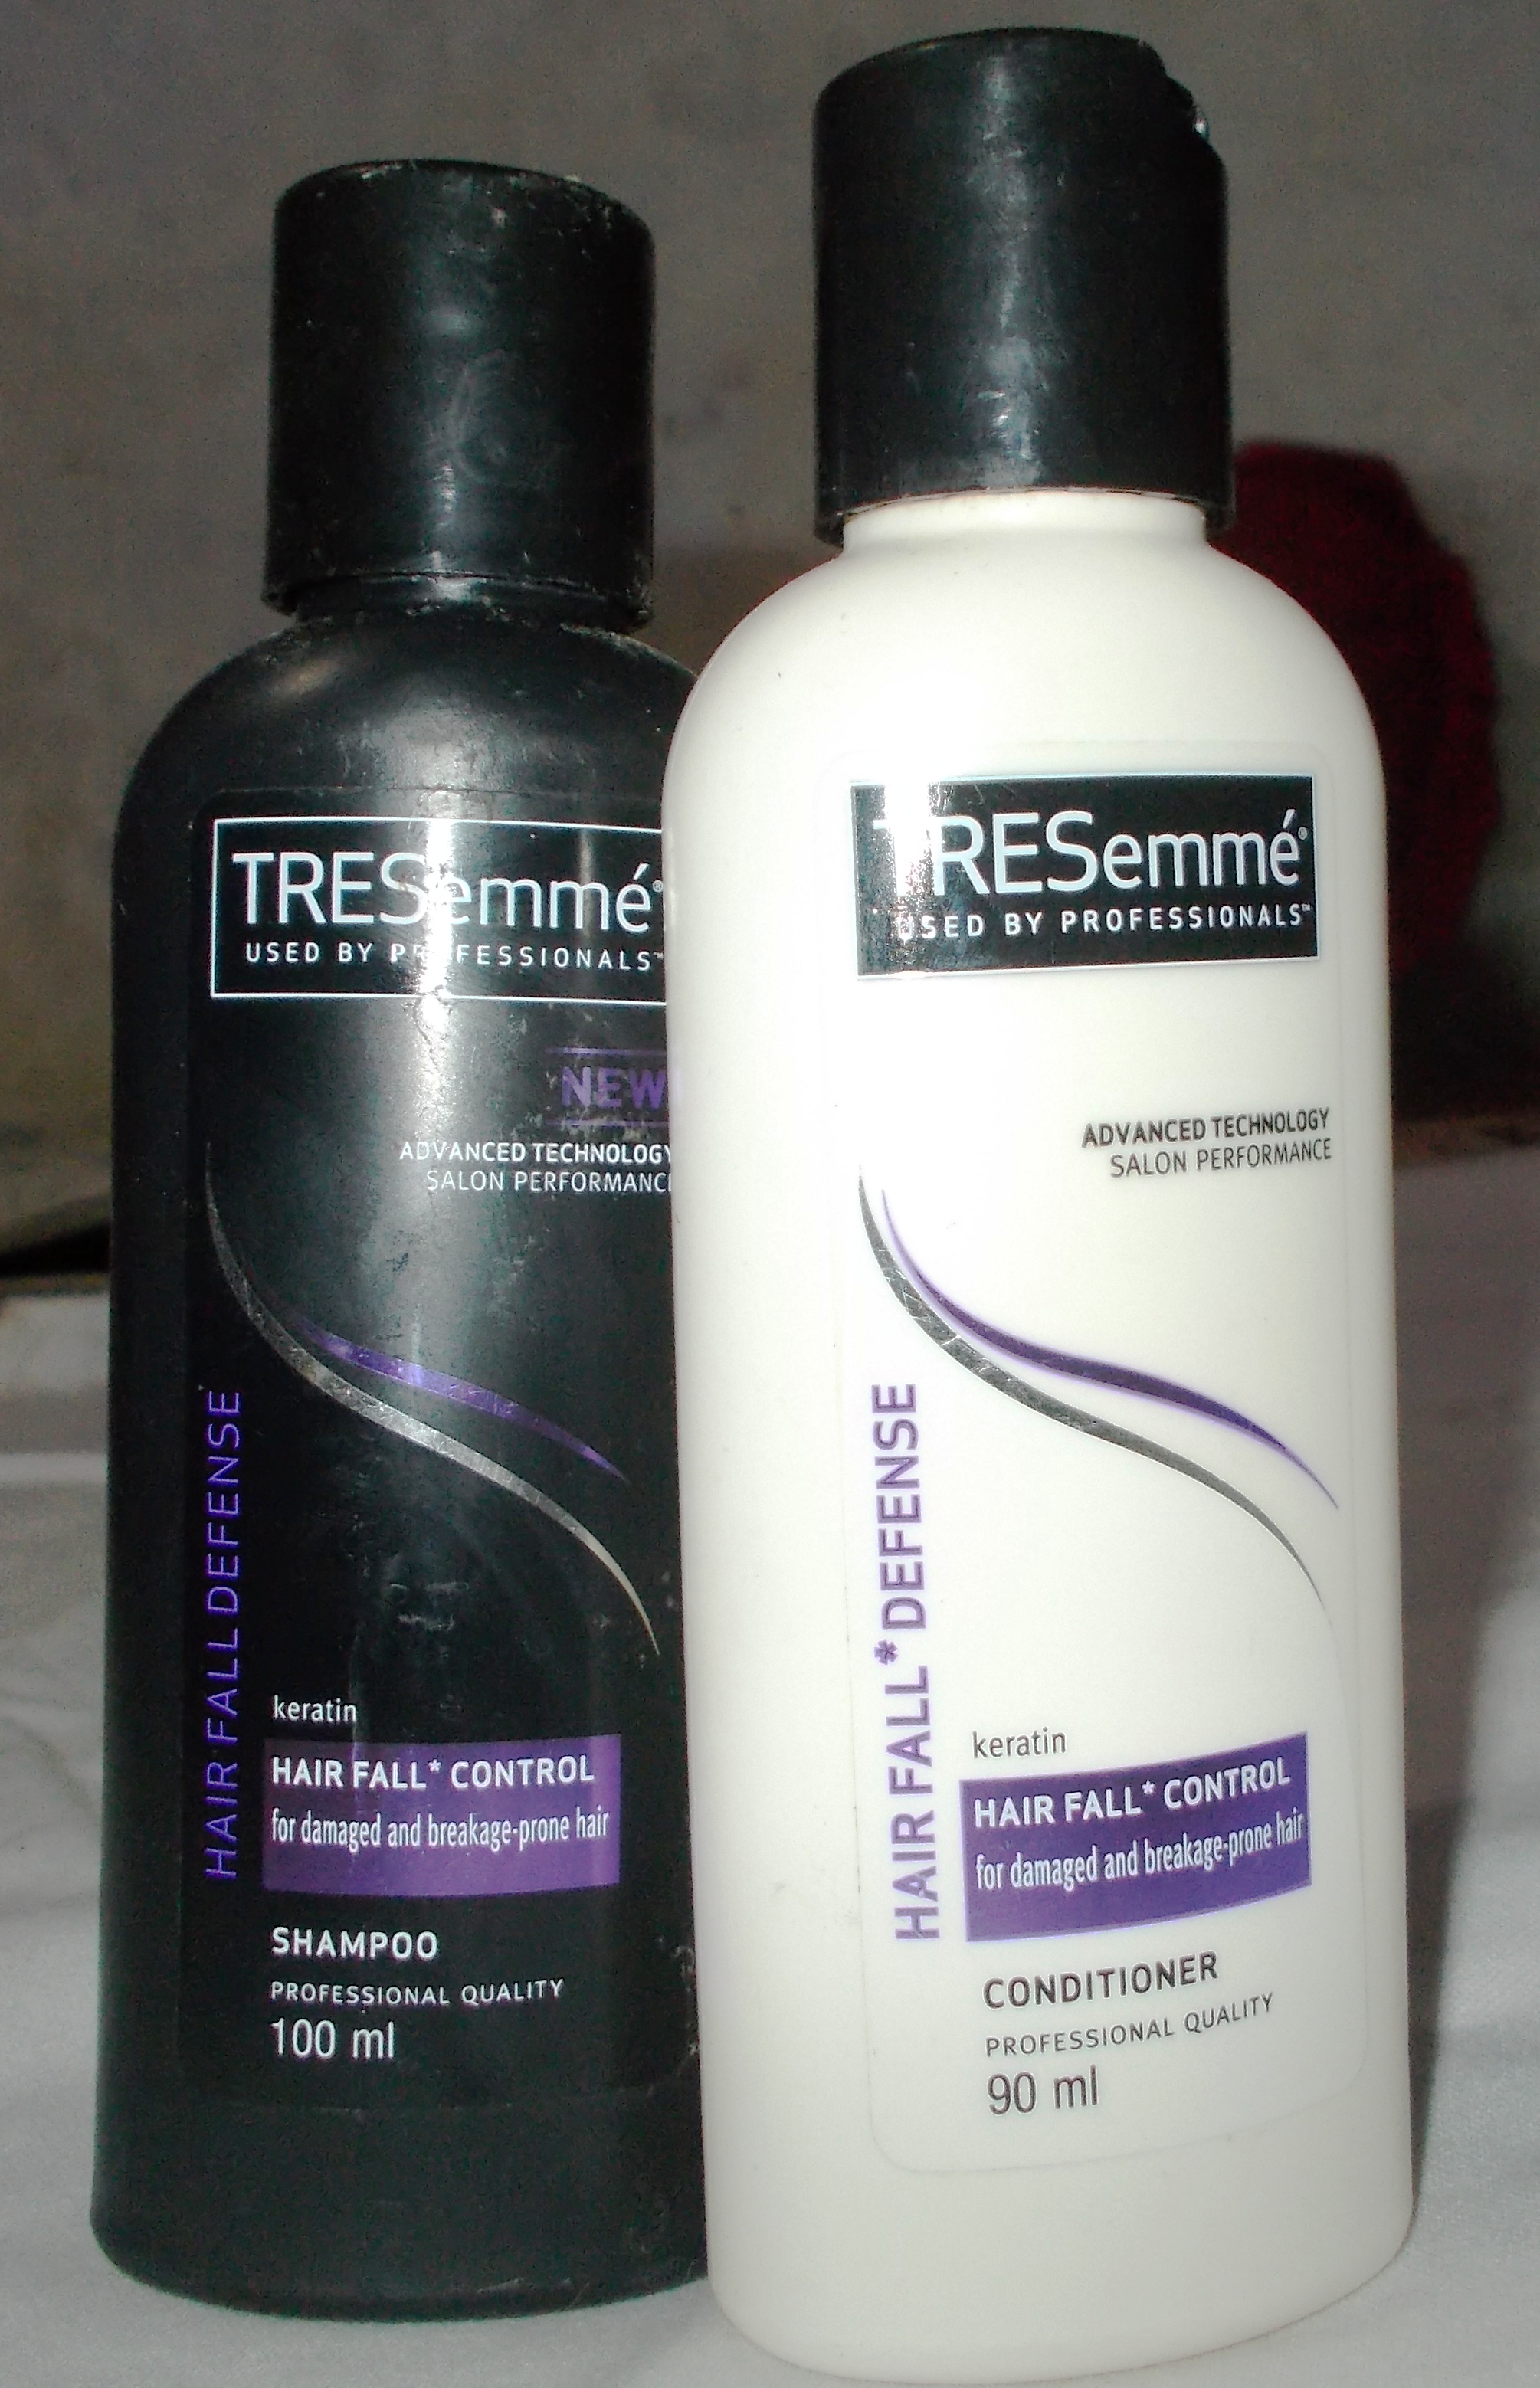 Tresemme Hair Fall Control Shampoo + Conditioner- Review | Glam Splashes  Forever